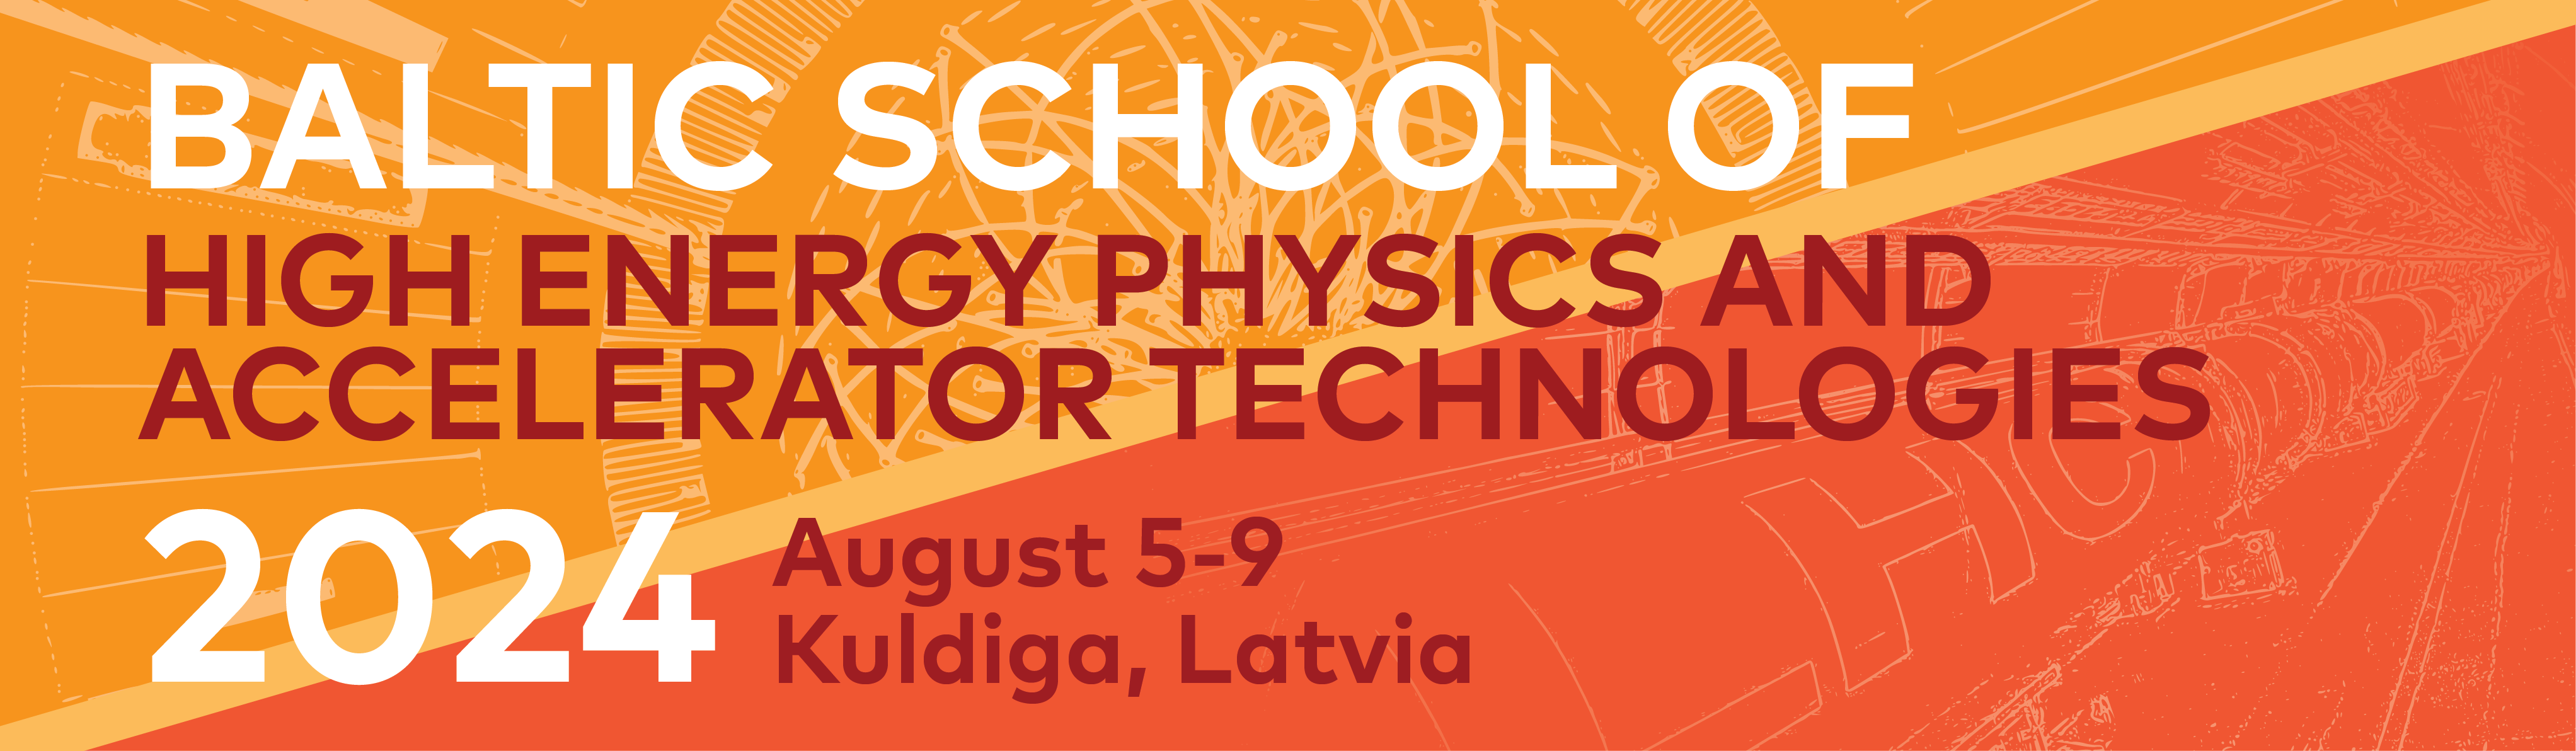 4th Baltic School of High-Energy Physics and Accelerator Technologies